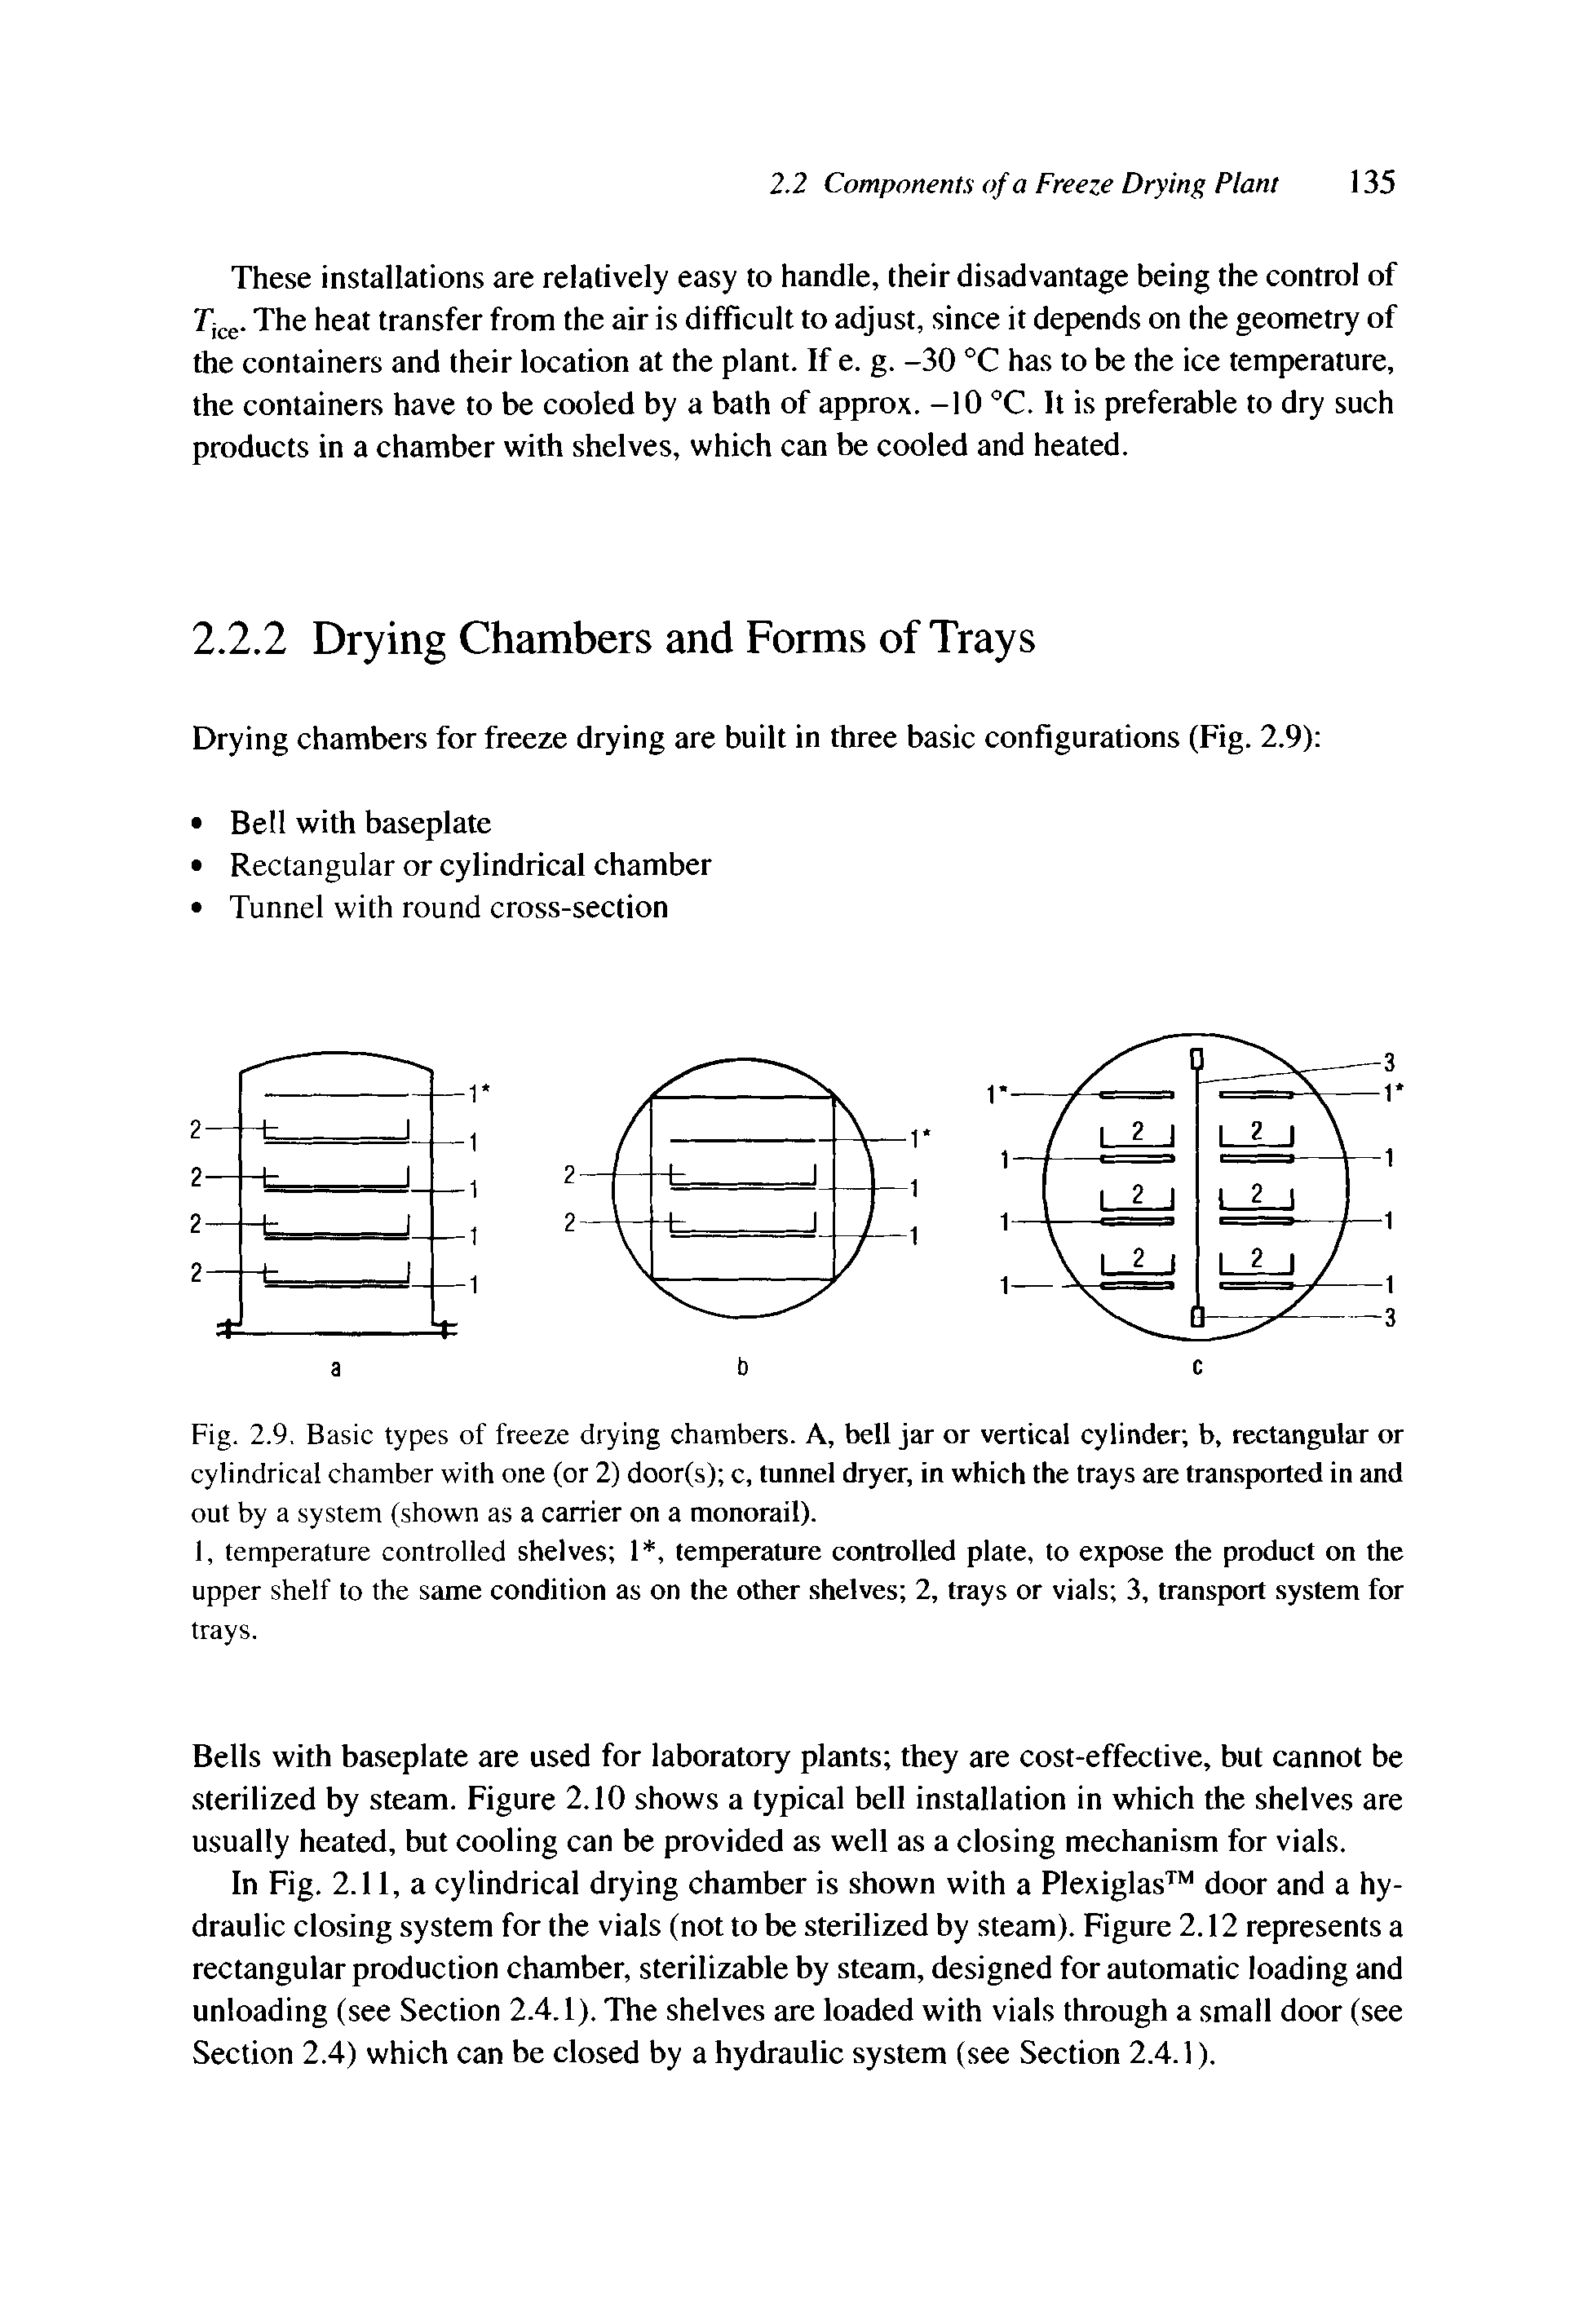 Fig. 2.9. Basic types of freeze drying chambers. A, bell jar or vertical cylinder b, rectangular or cylindrical chamber with one (or 2) door(s) c, tunnel dryer, in which the trays are transported in and out by a system (shown as a carrier on a monorail).